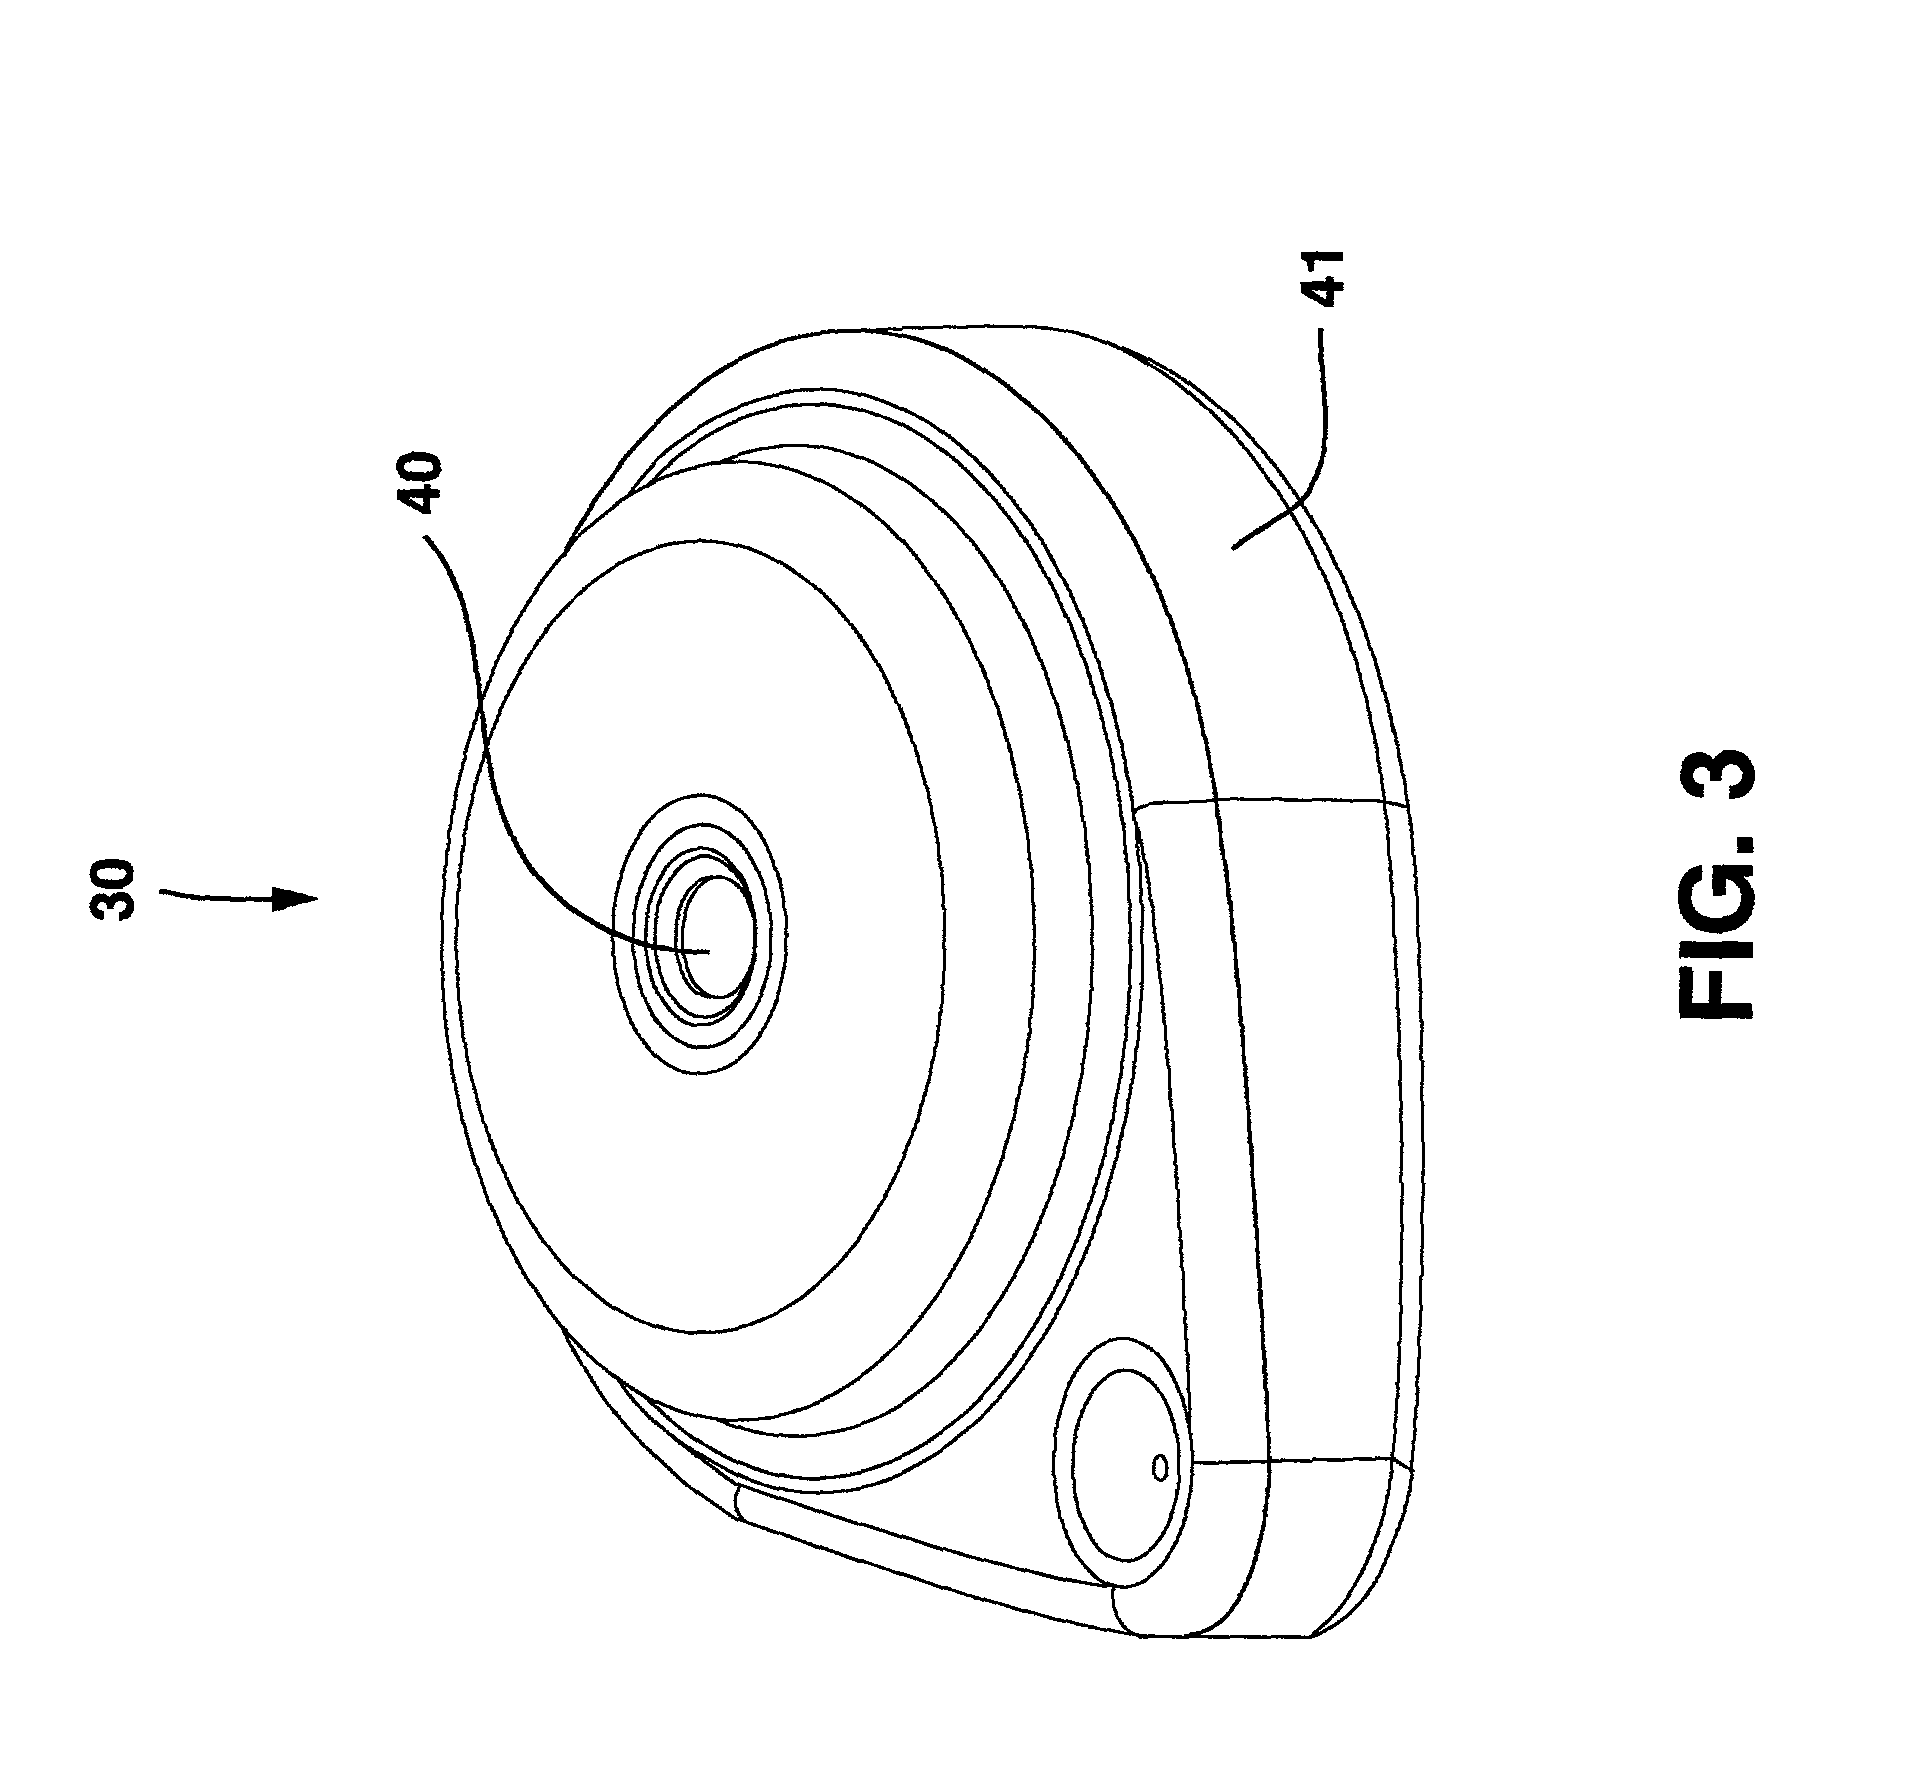 Permanent magnet solenoid pump for an implantable therapeutic substance delivery device